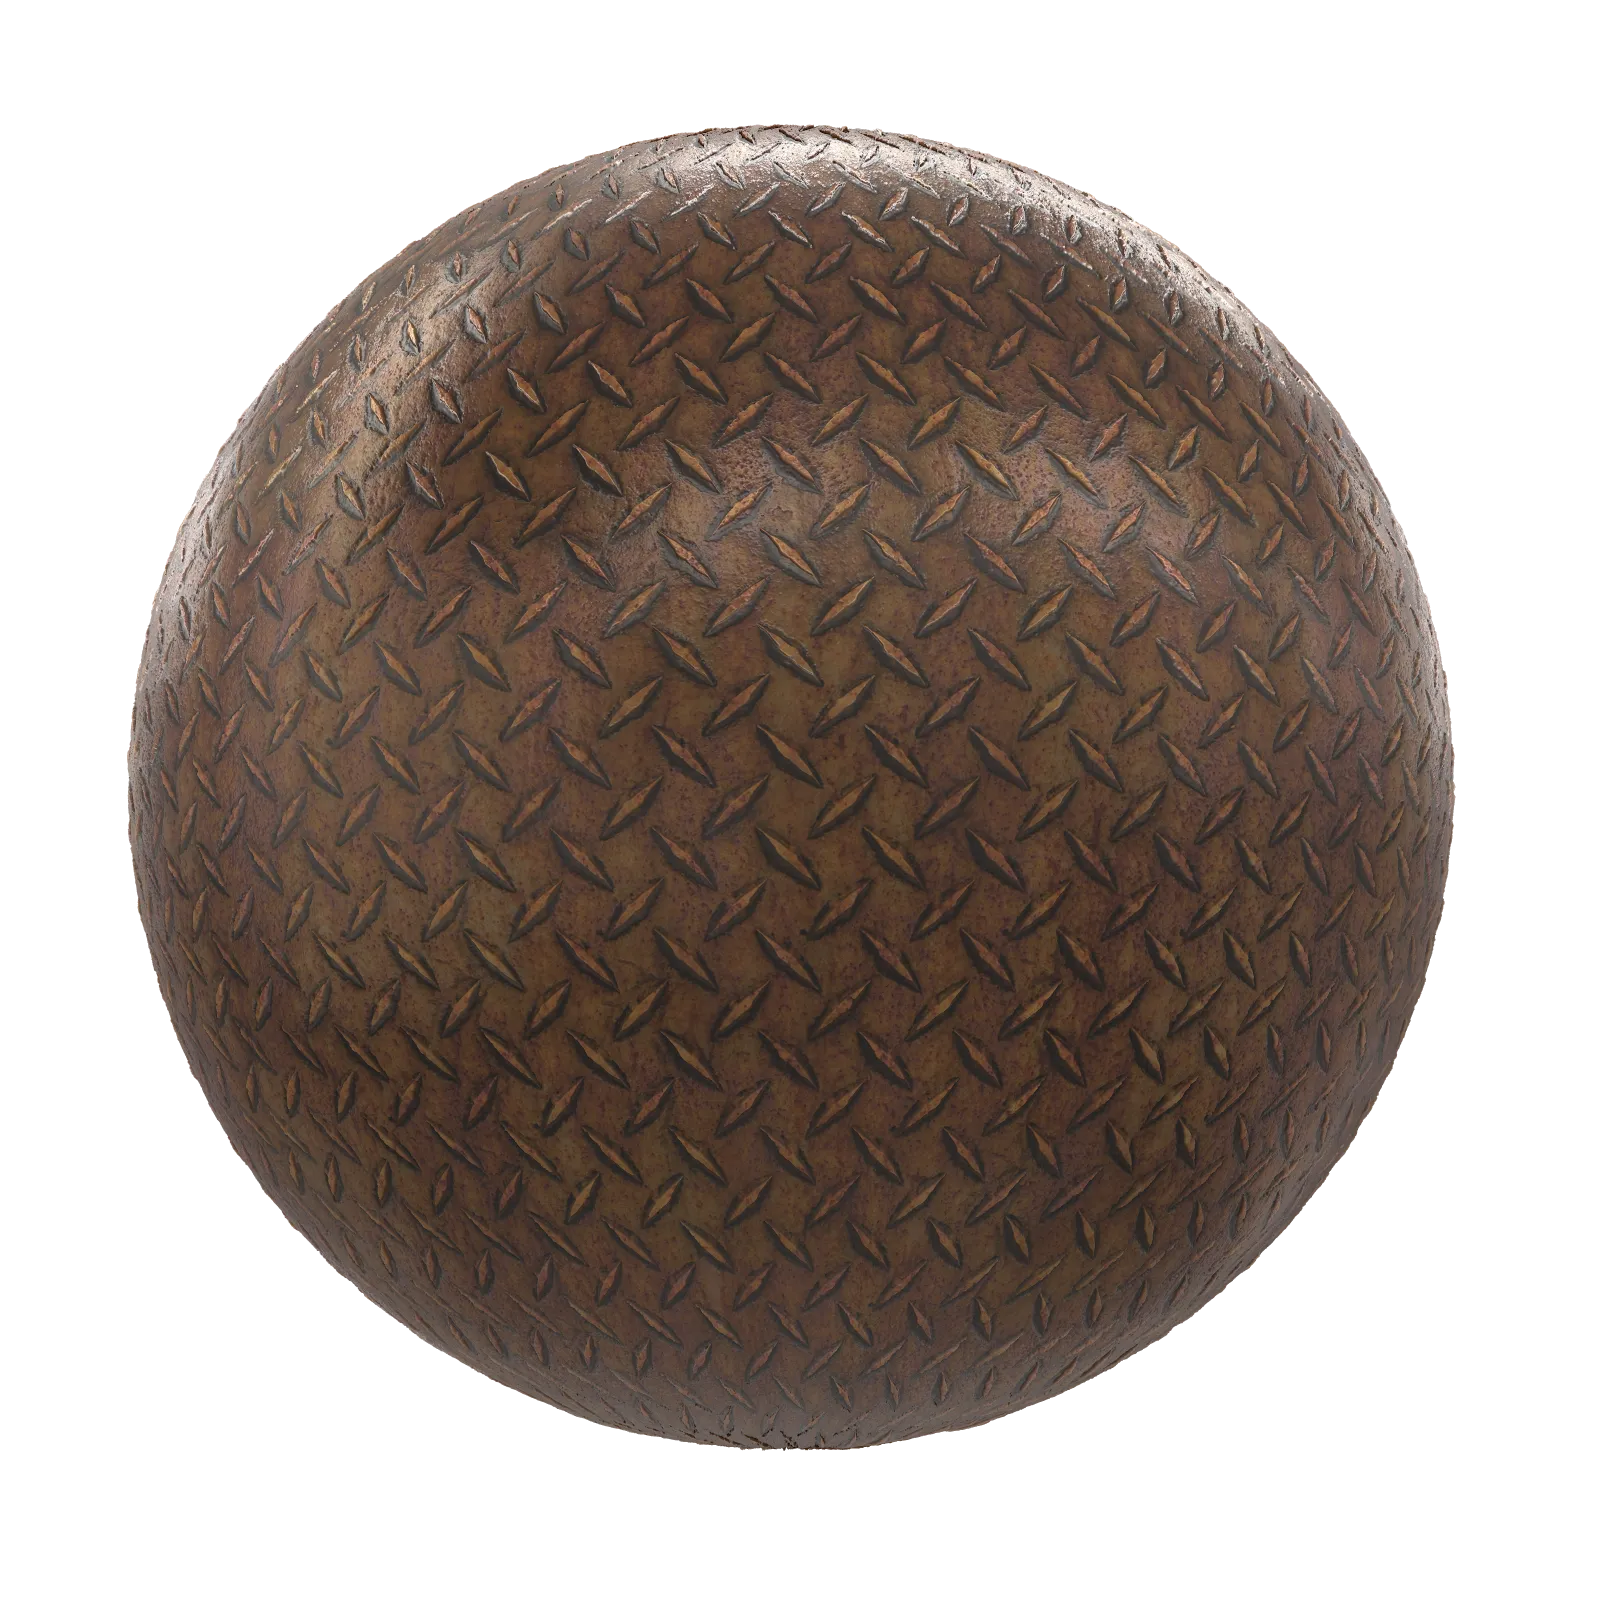 PBR CGAXIS TEXTURES – METALS – Rusty Patterned Metal 05